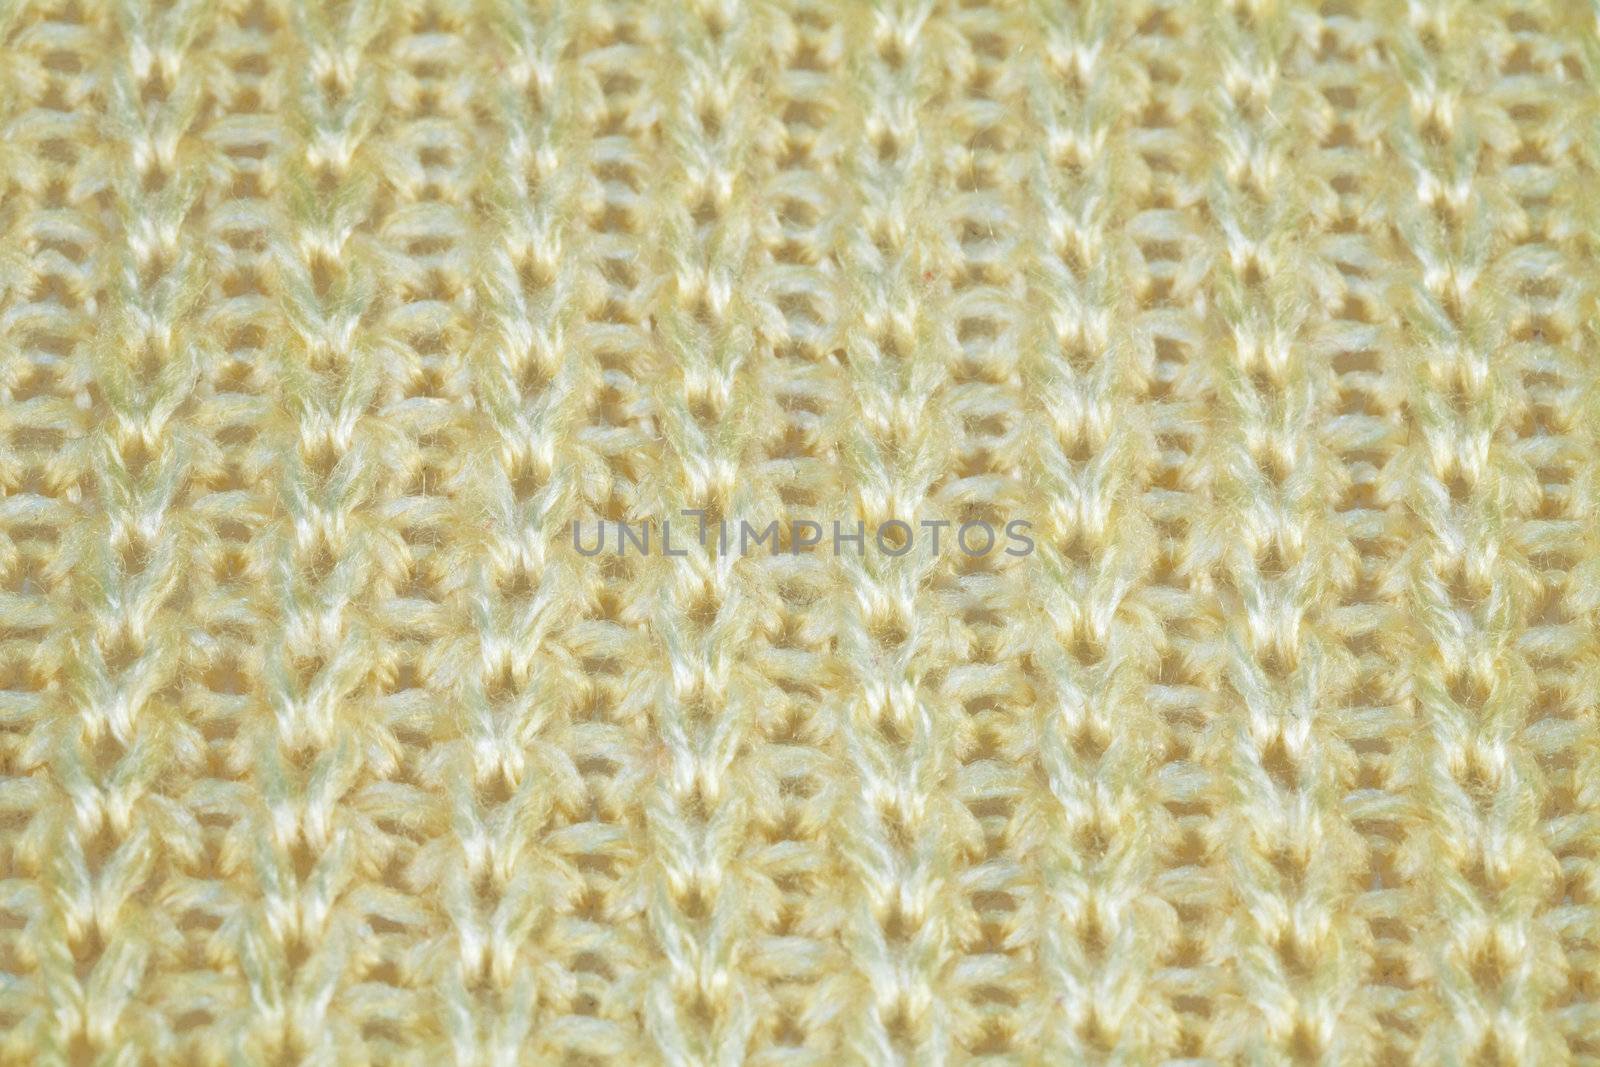 A texture made from a knitted material
